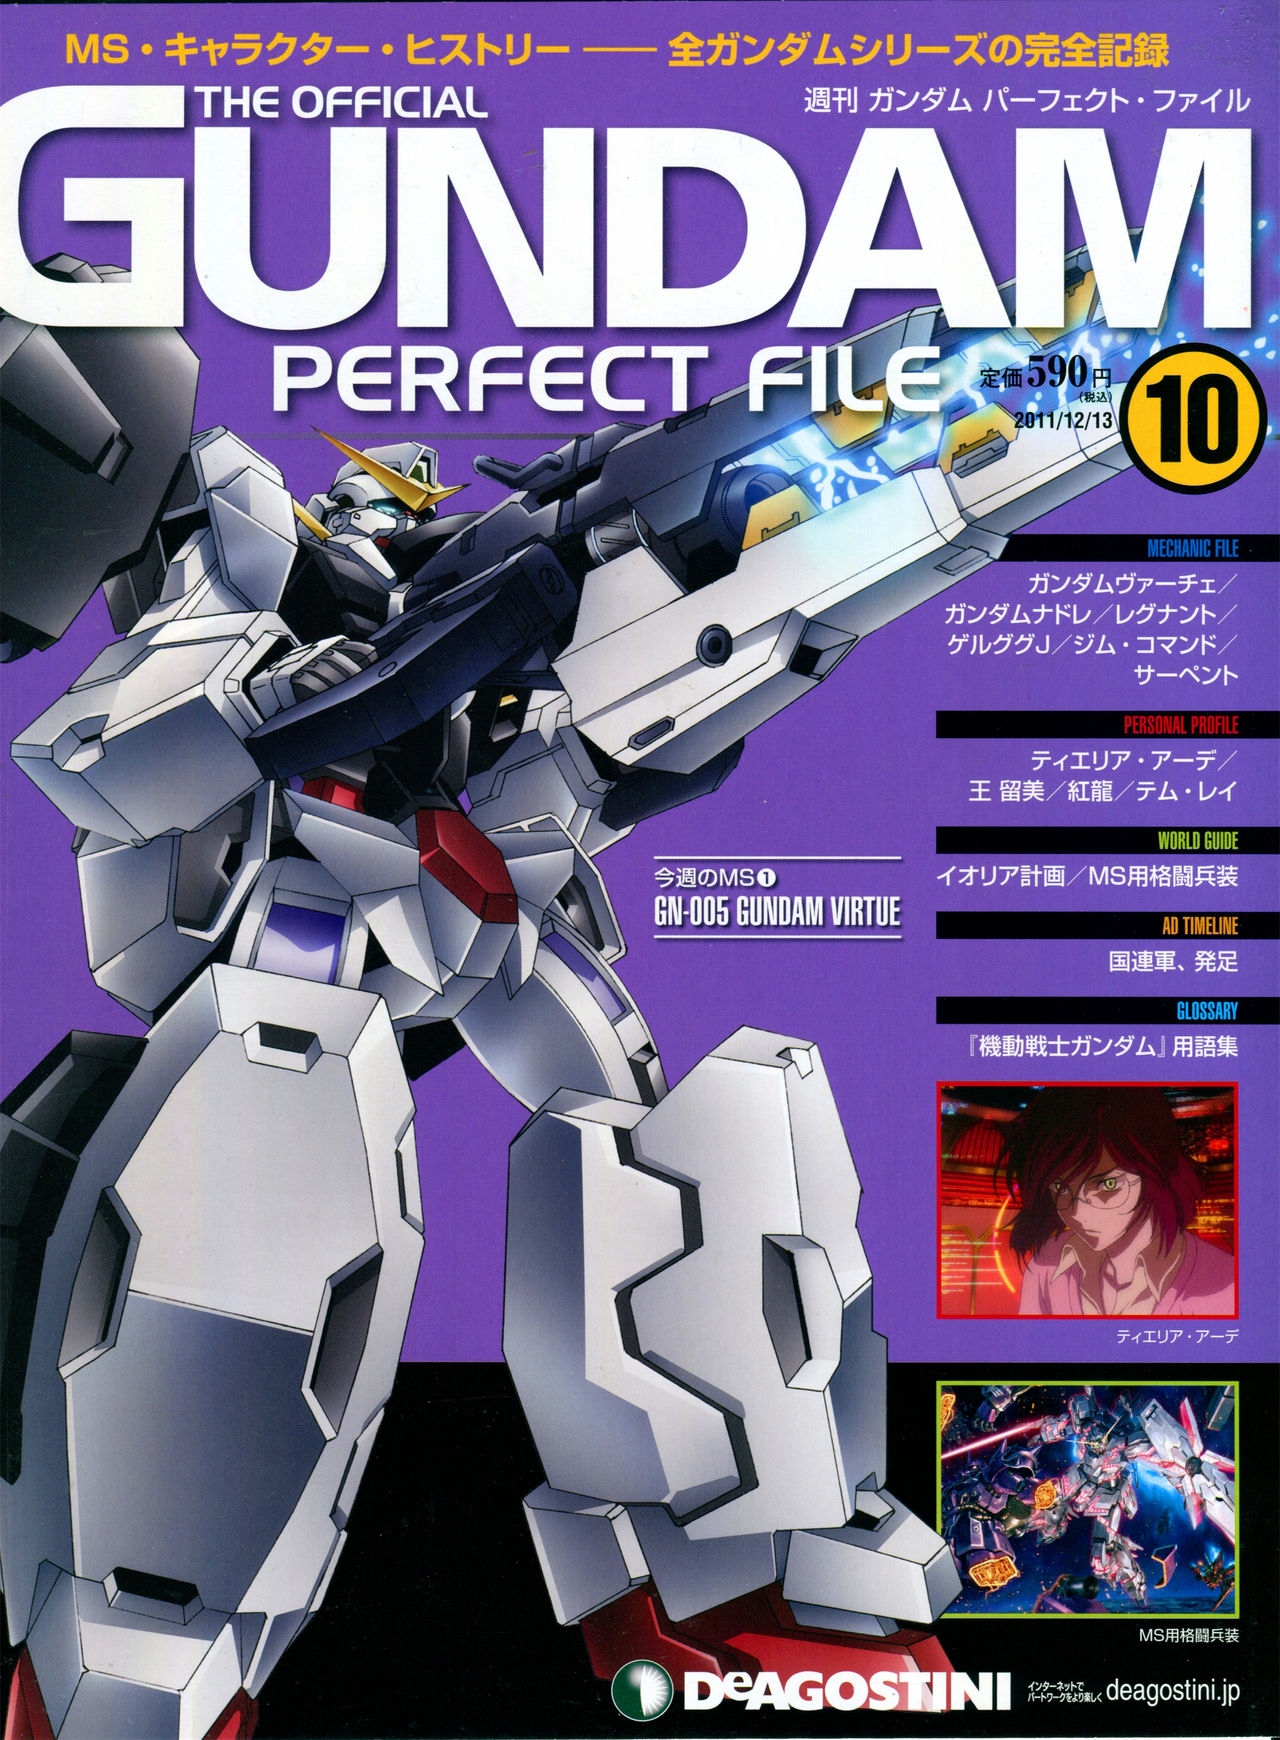 The Official Gundam Perfect File - No. 010 0